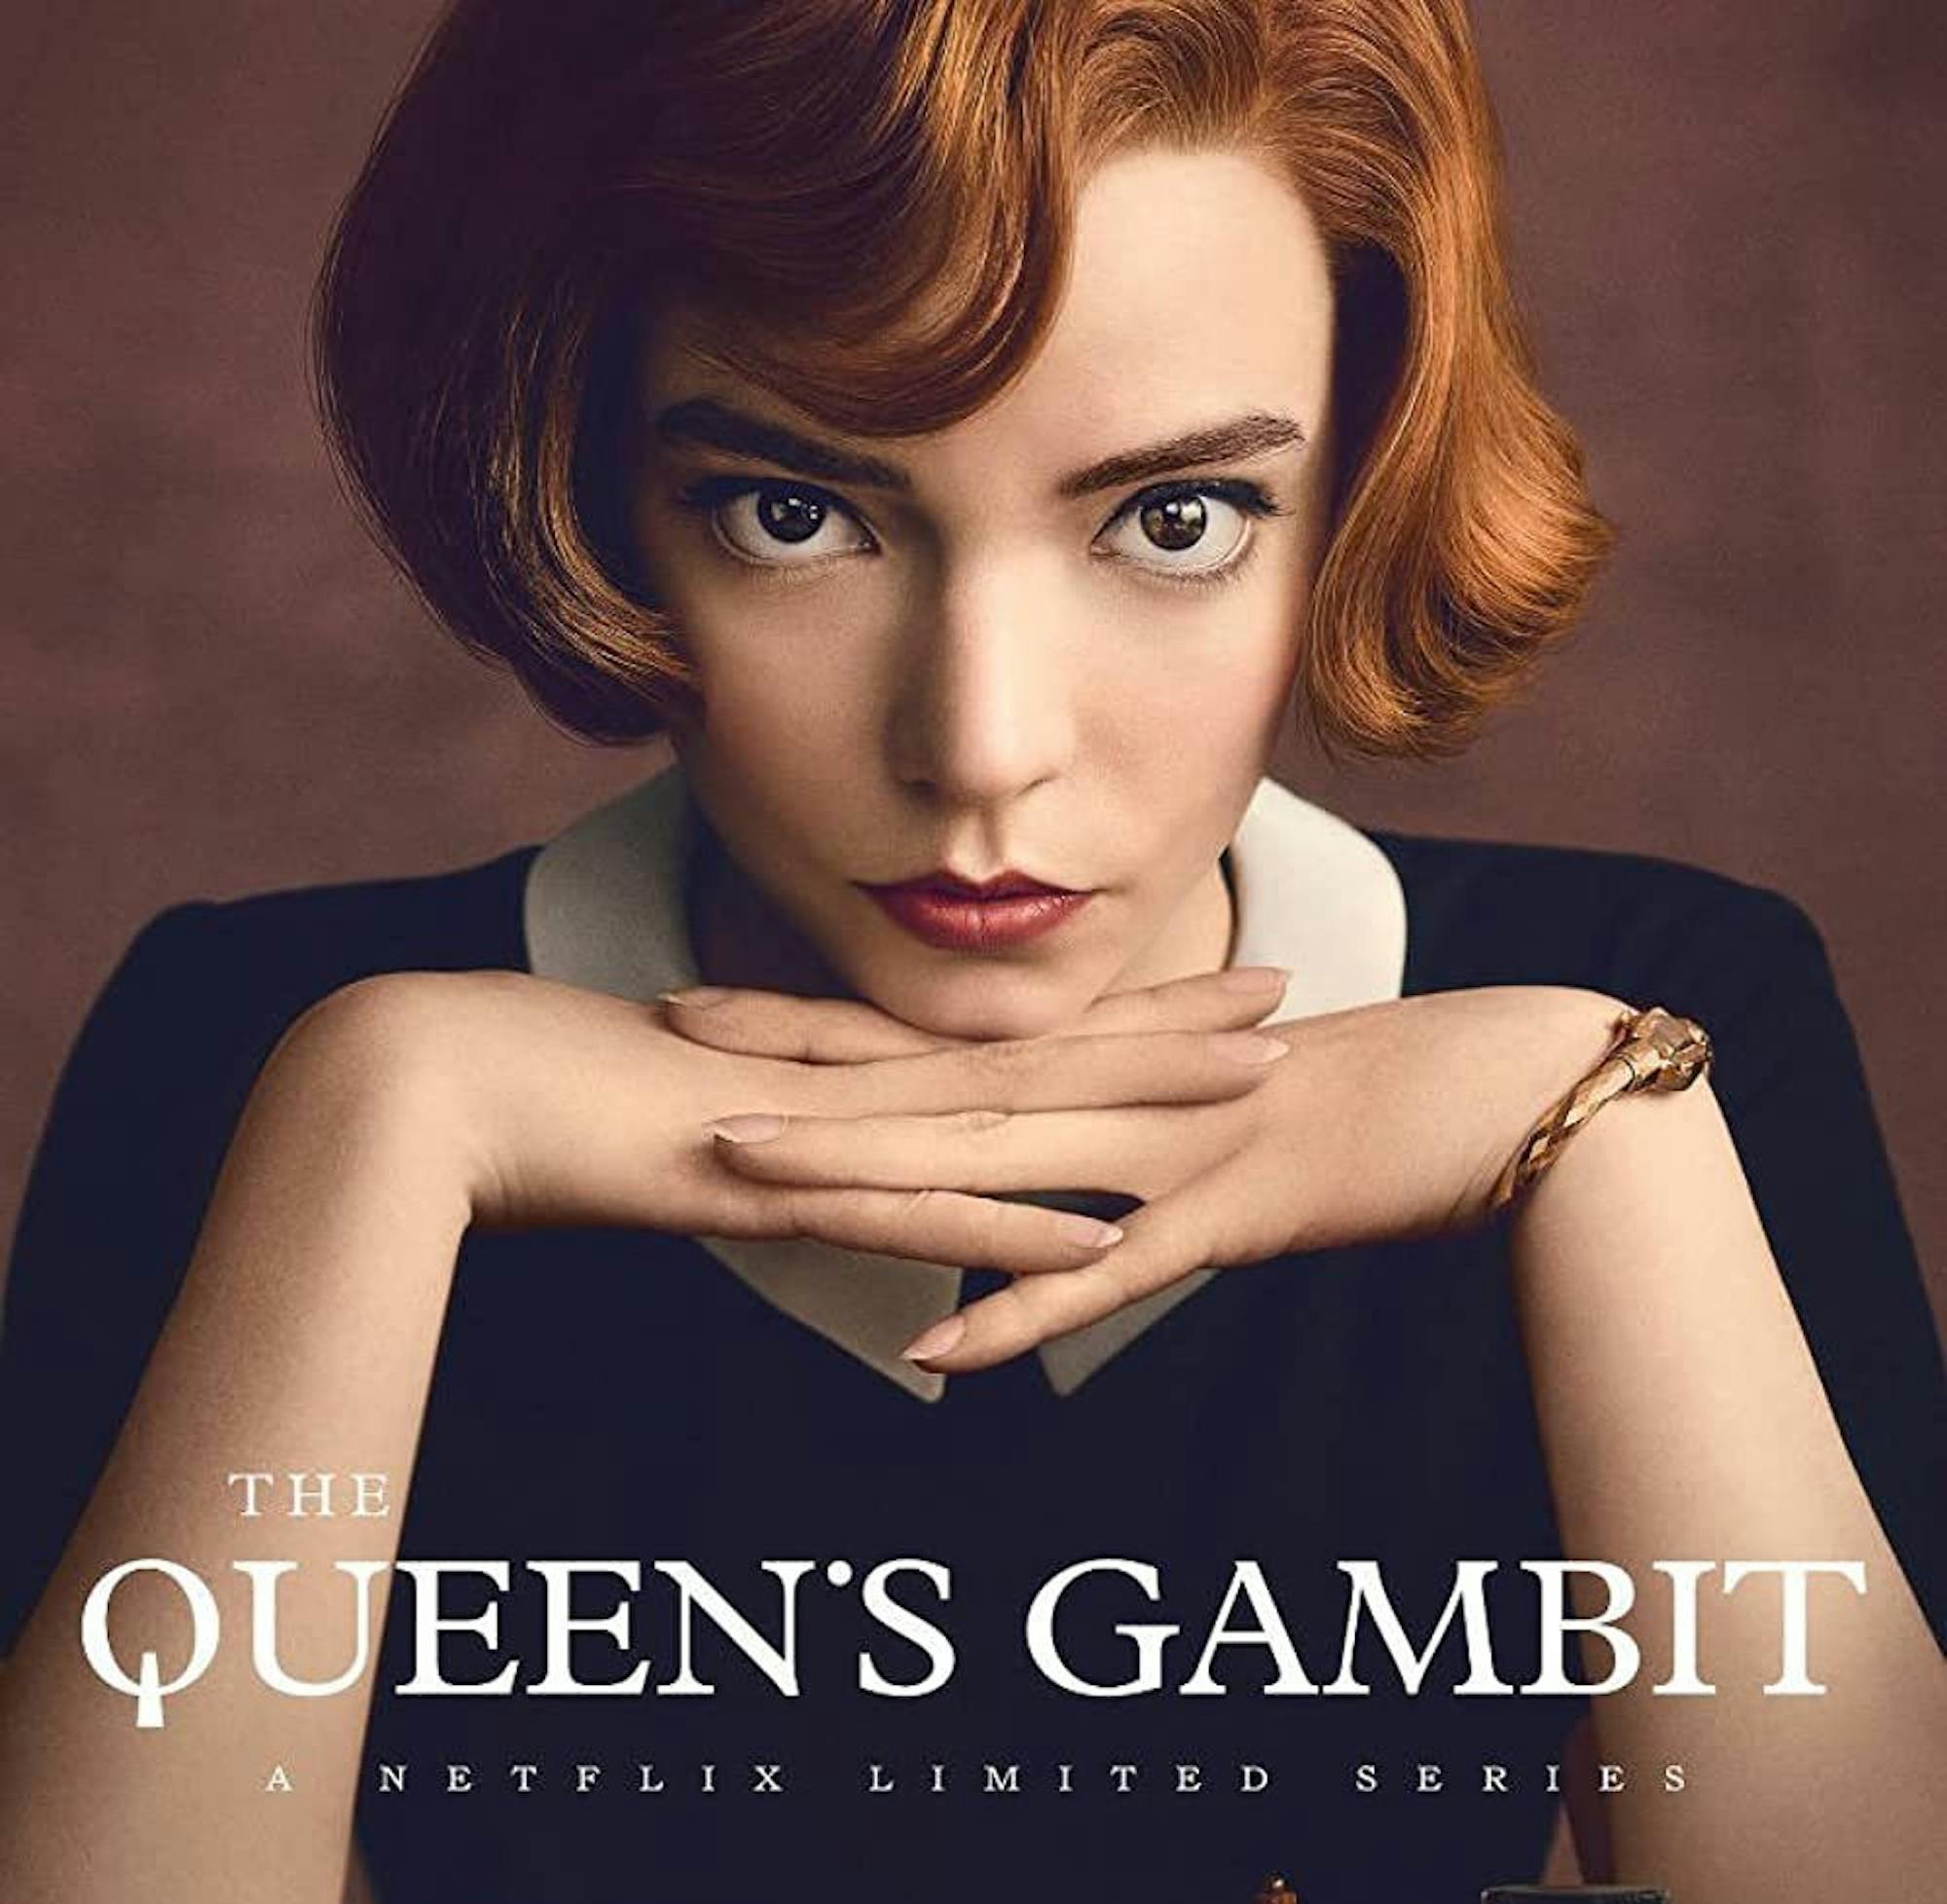 The Queen's Gambit' Getting Turned Into Stage Musical